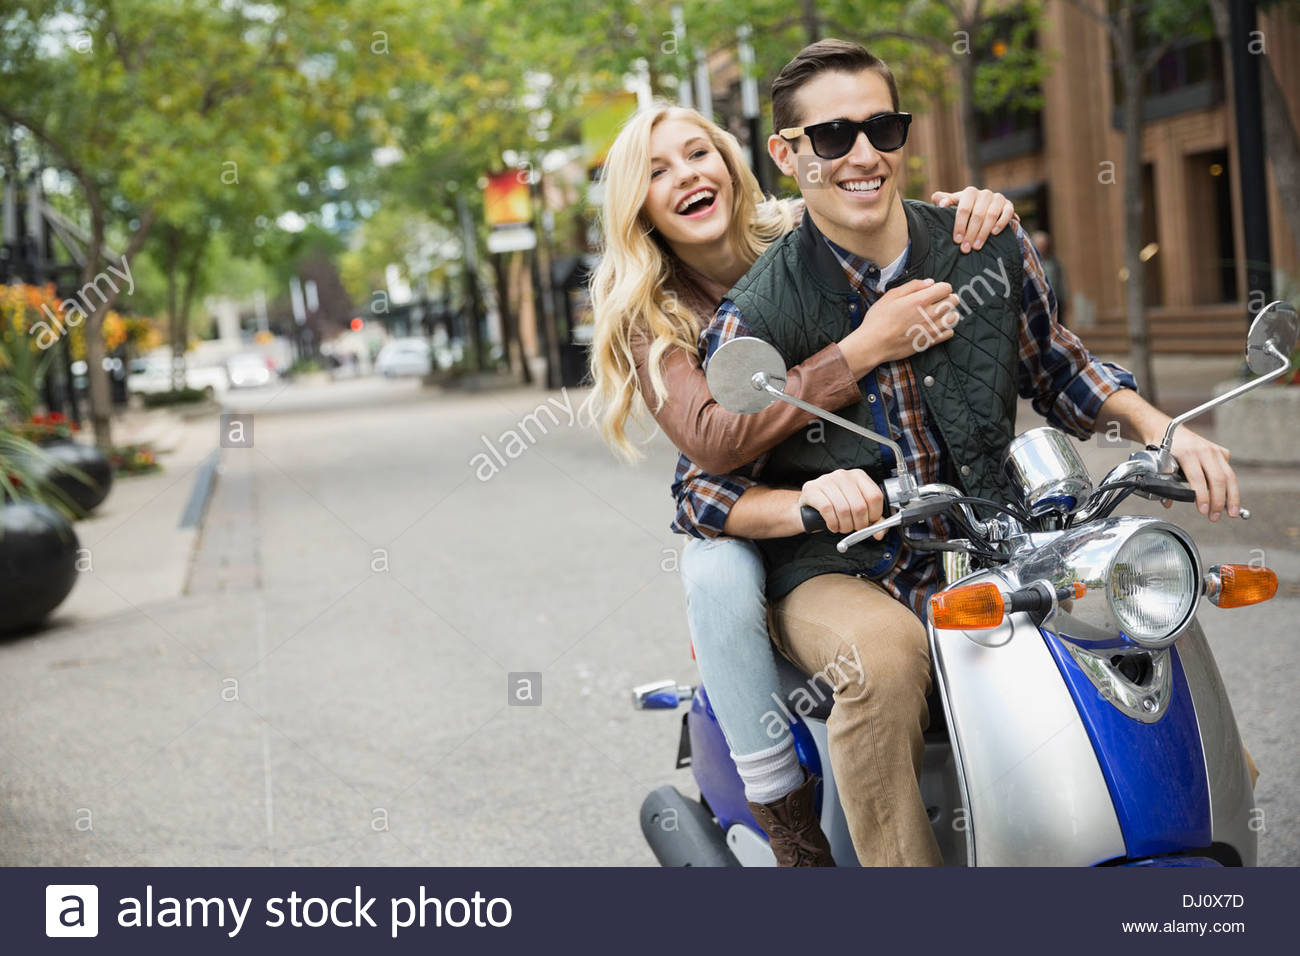 Couple riding on scooter Stock Photo